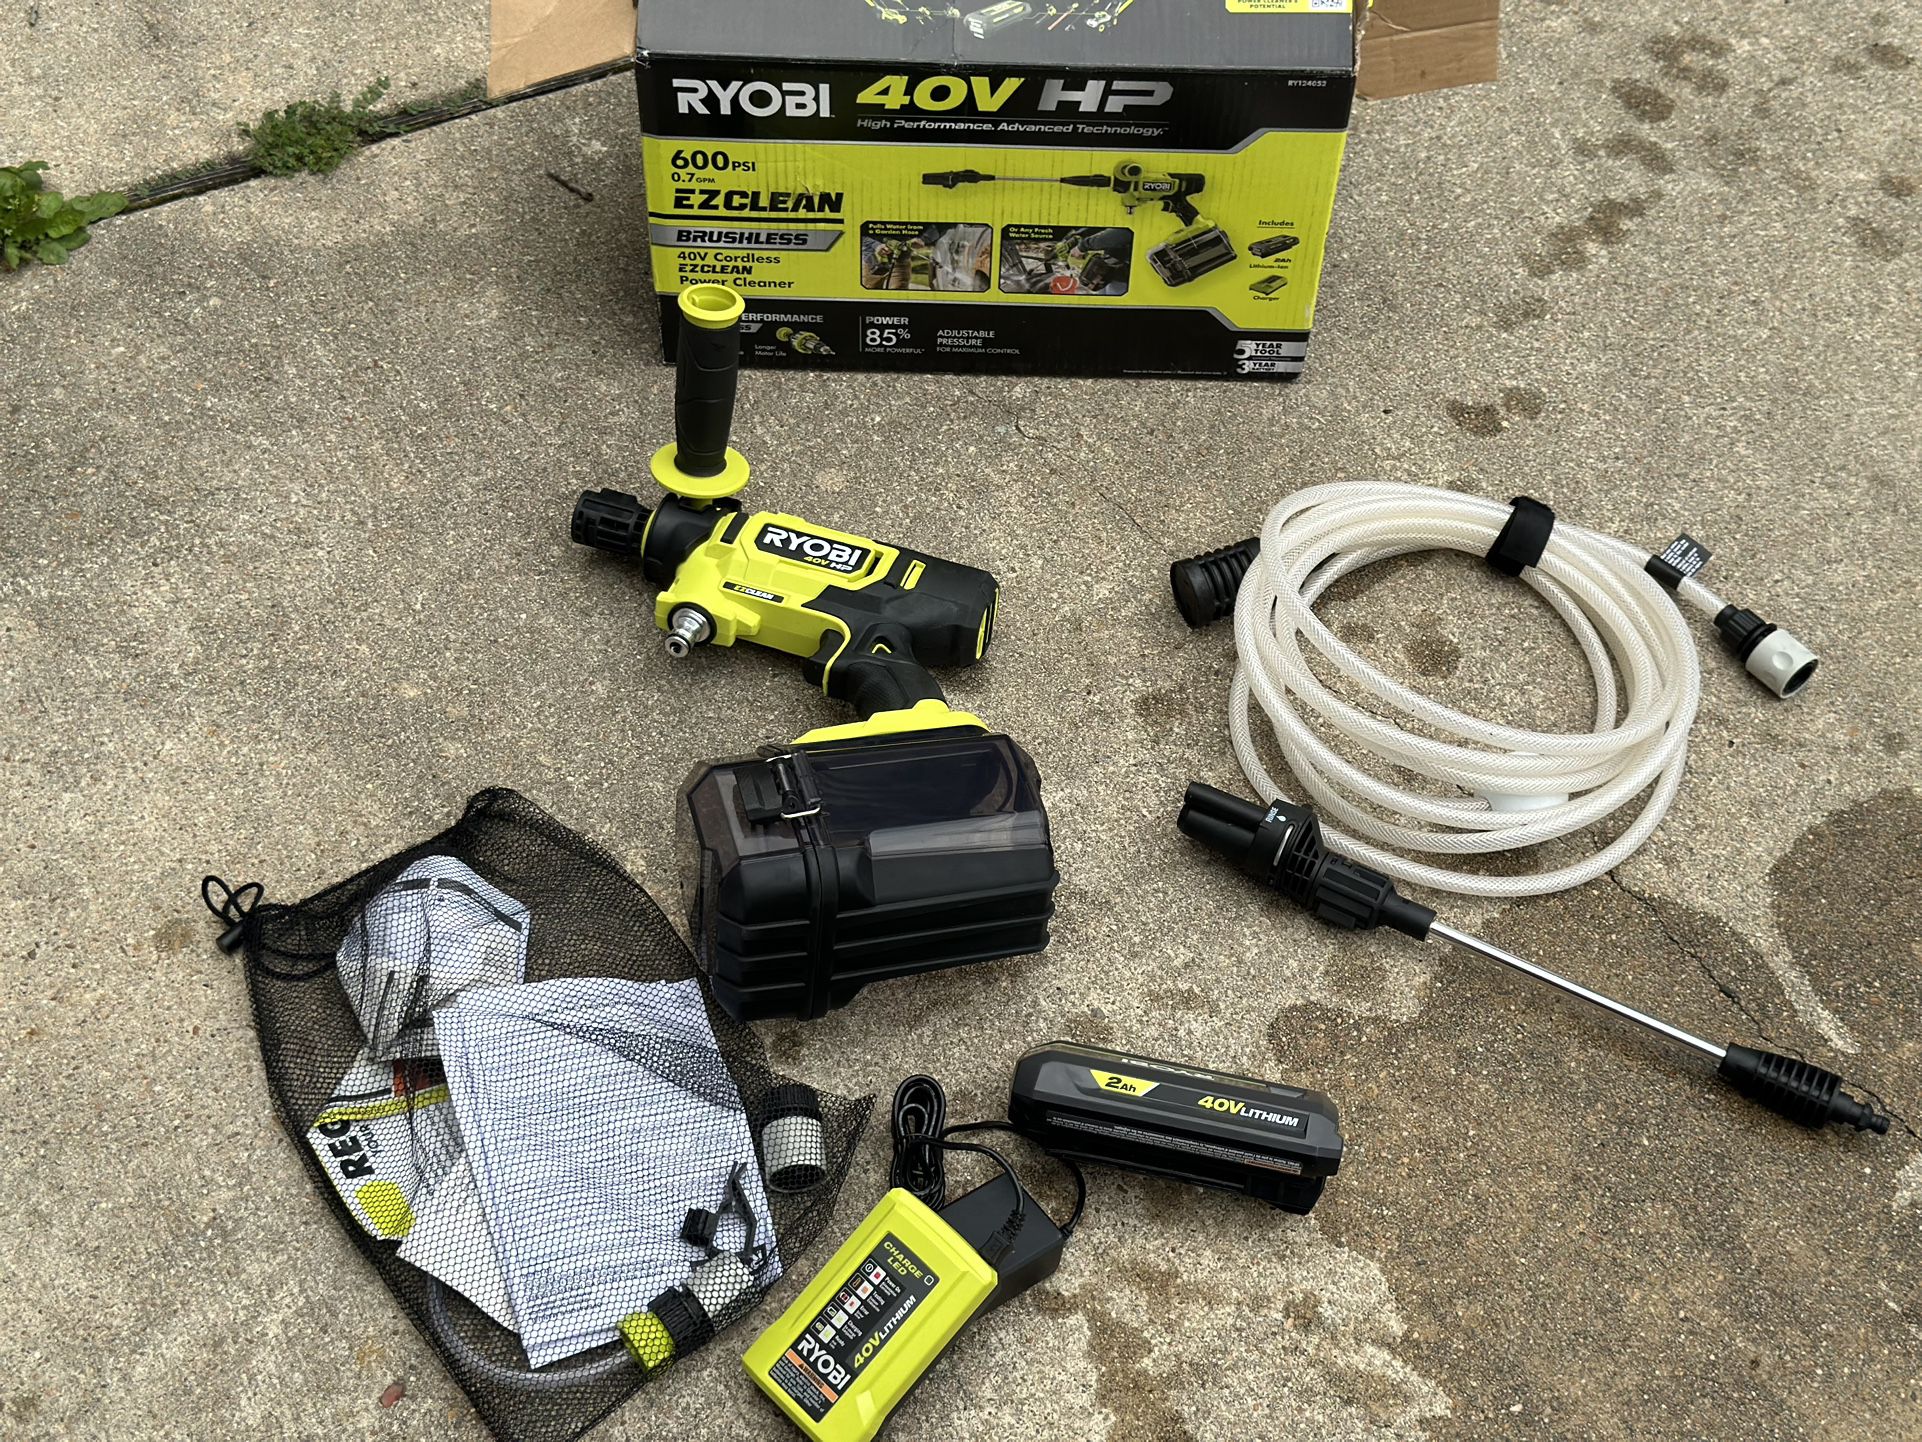 Ryobi 40 Volt Hp Brushless EZ Clean 600psi Power Cleaner With 2ah Battery And Charger 